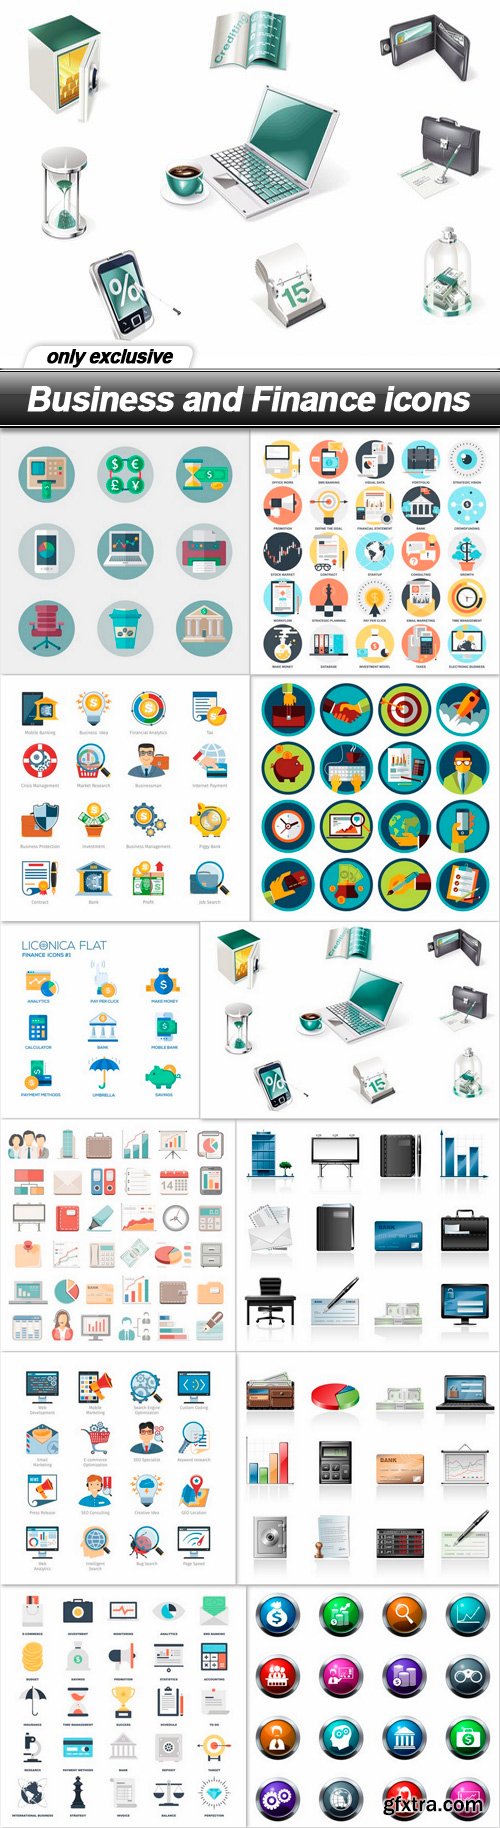 Business and Finance icons - 12 EPS